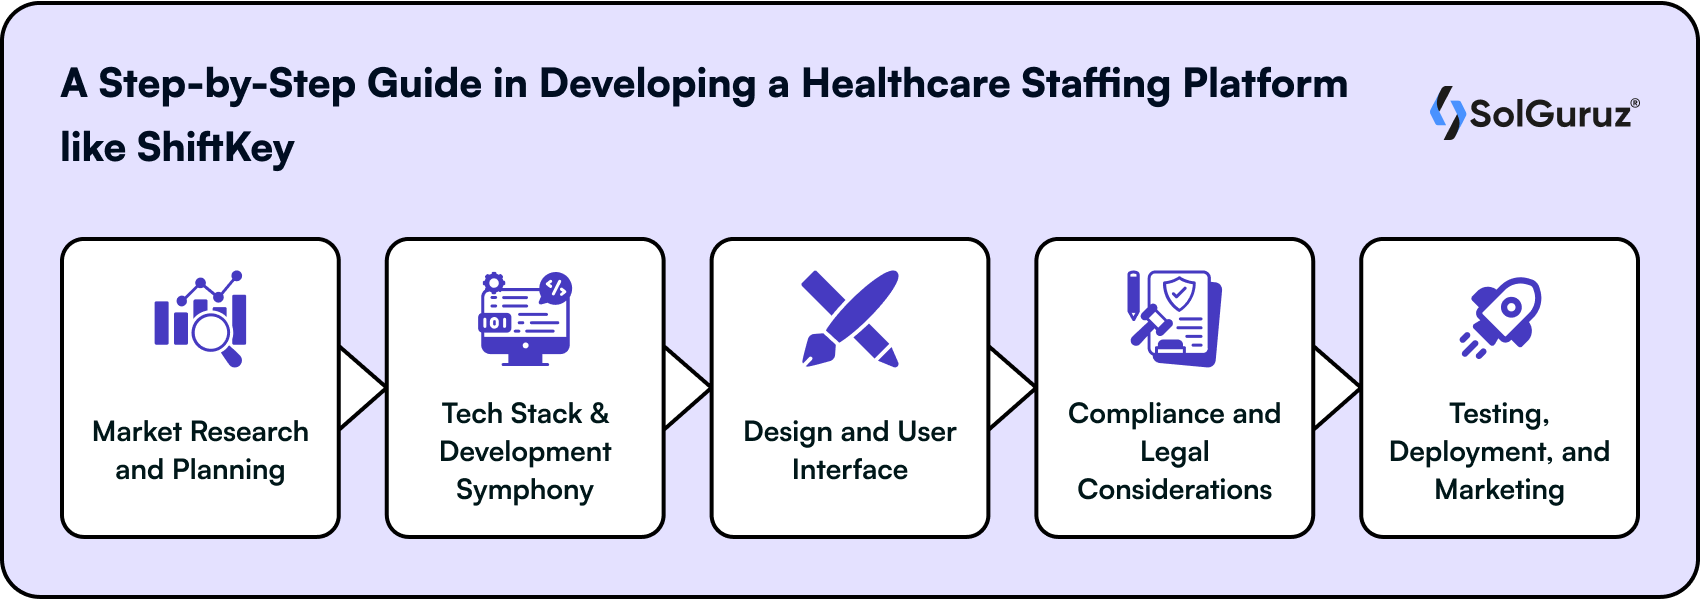 A Step-by-Step Guide in Developing a Healthcare Staffing Platform like ShiftKey